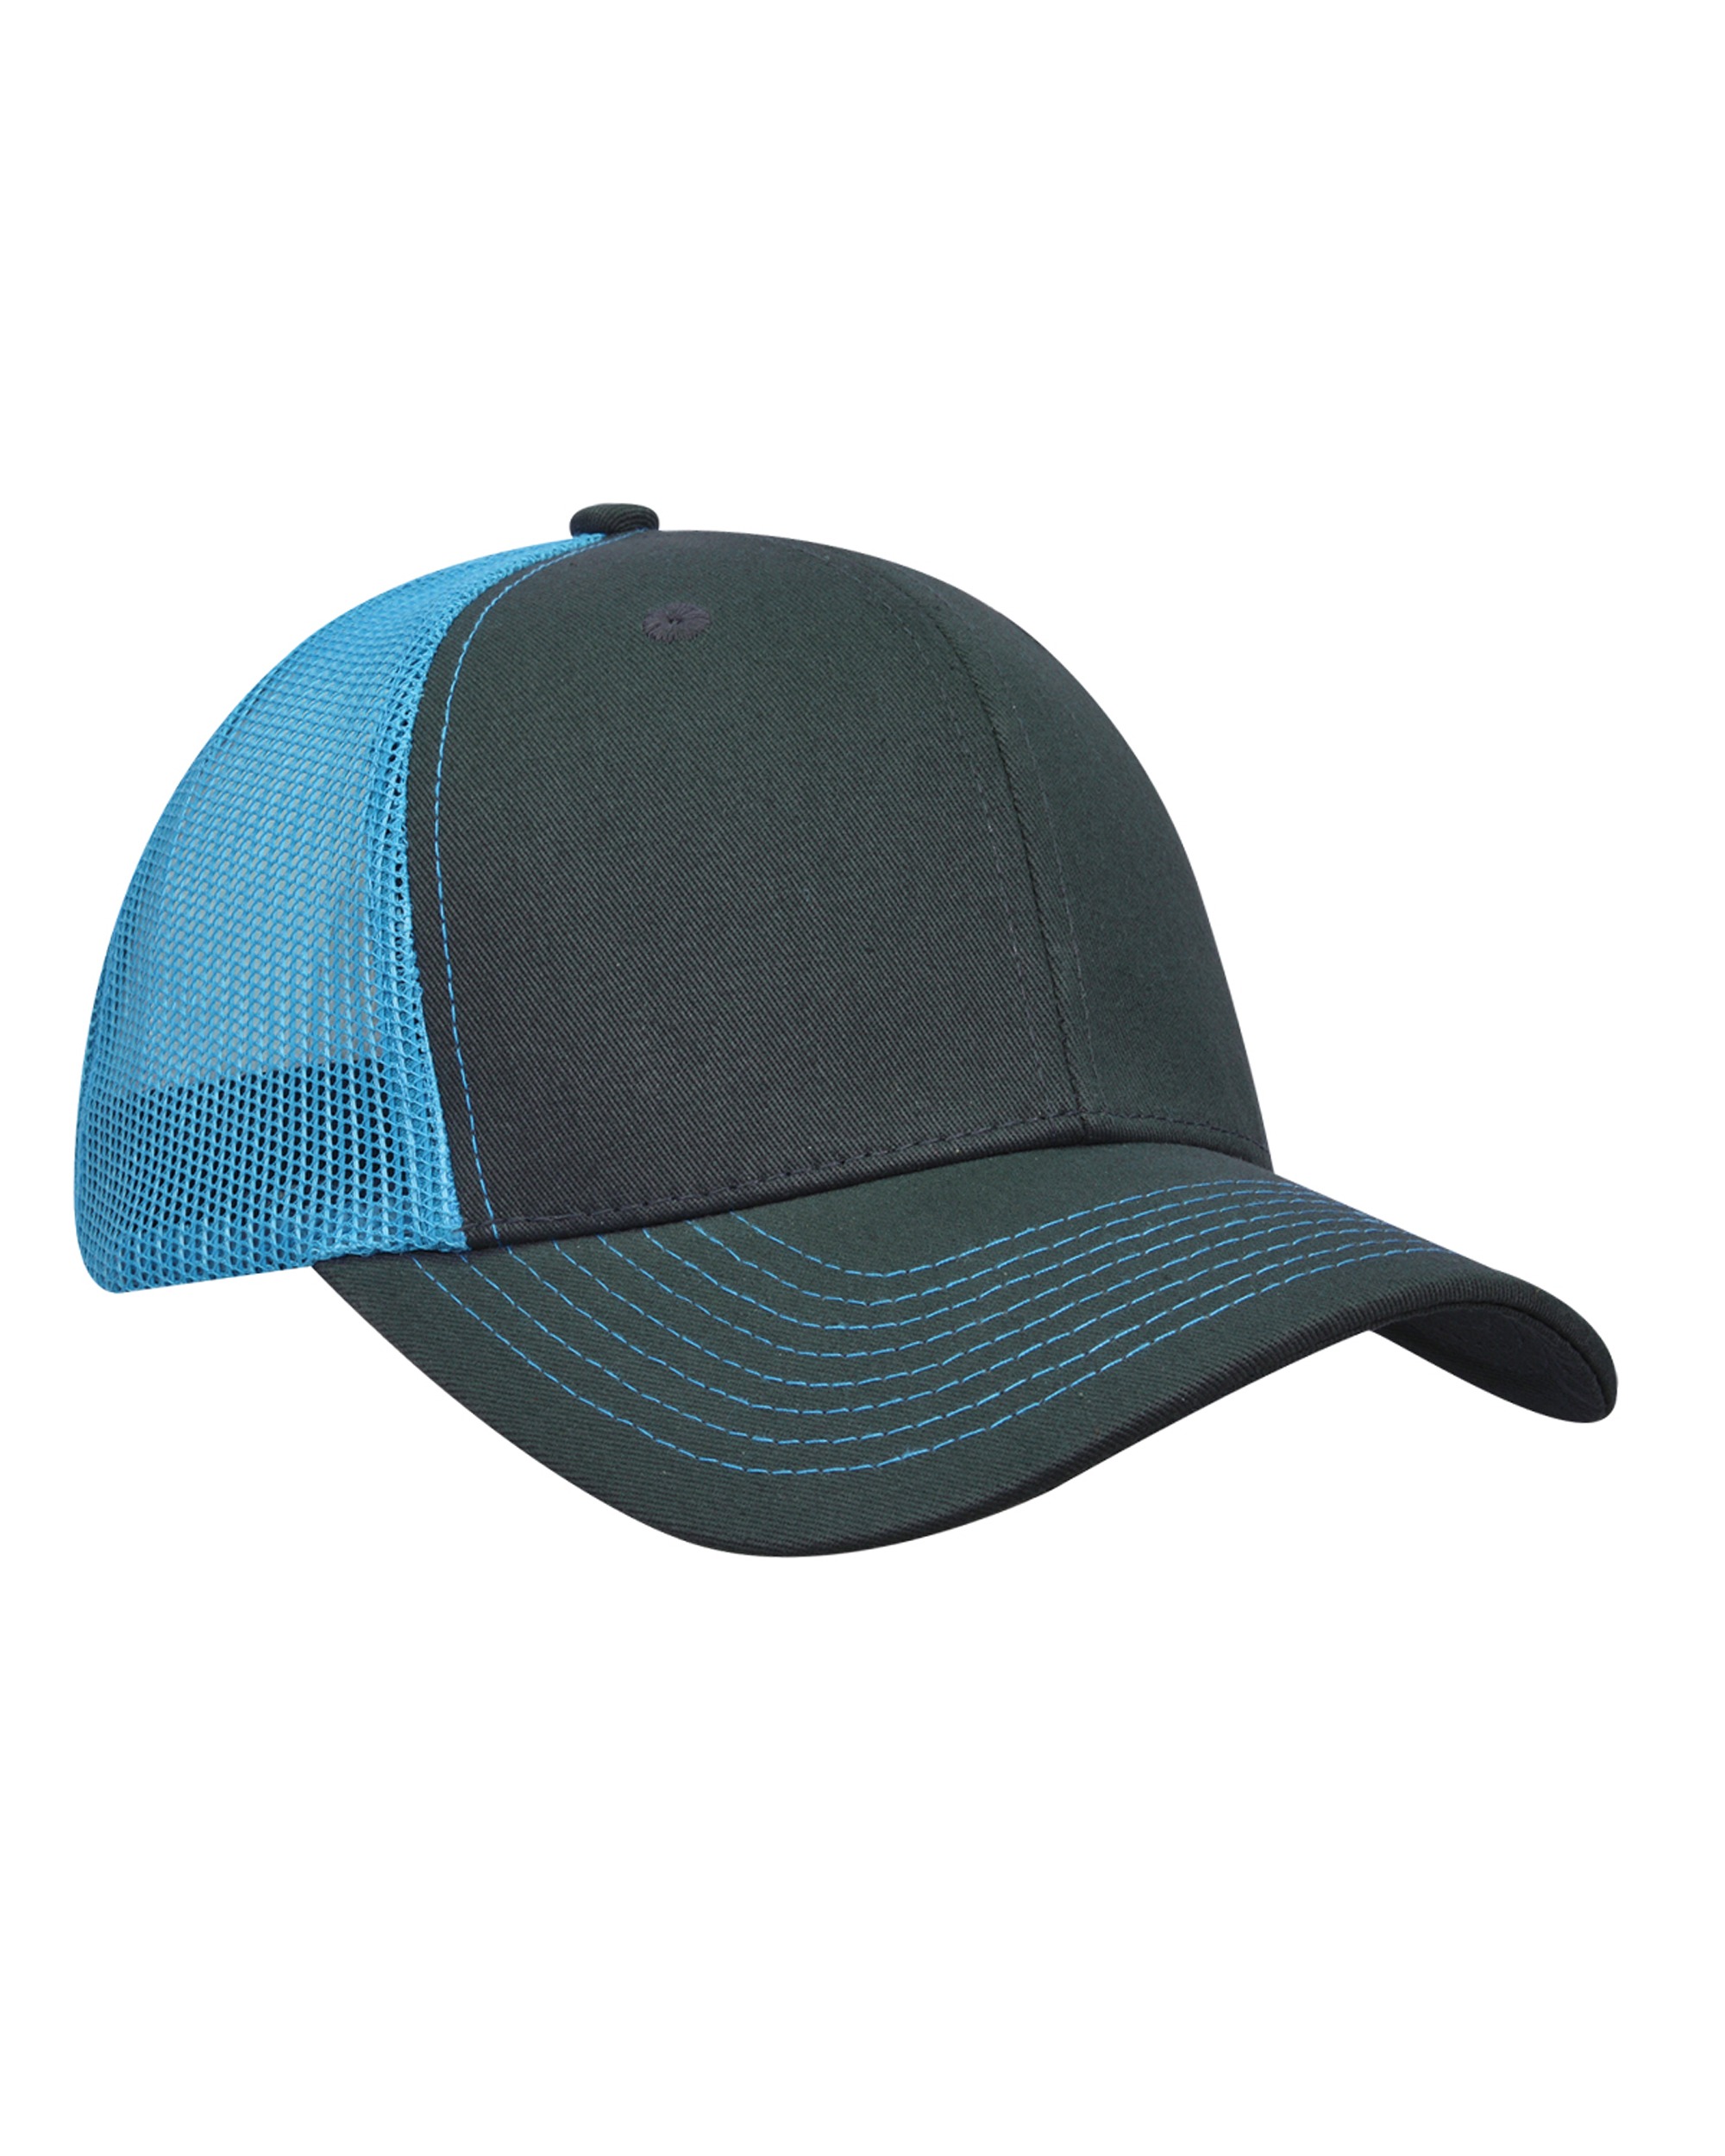 EastWest Embroidery 8400 6 Panel Neon Mesh Cap